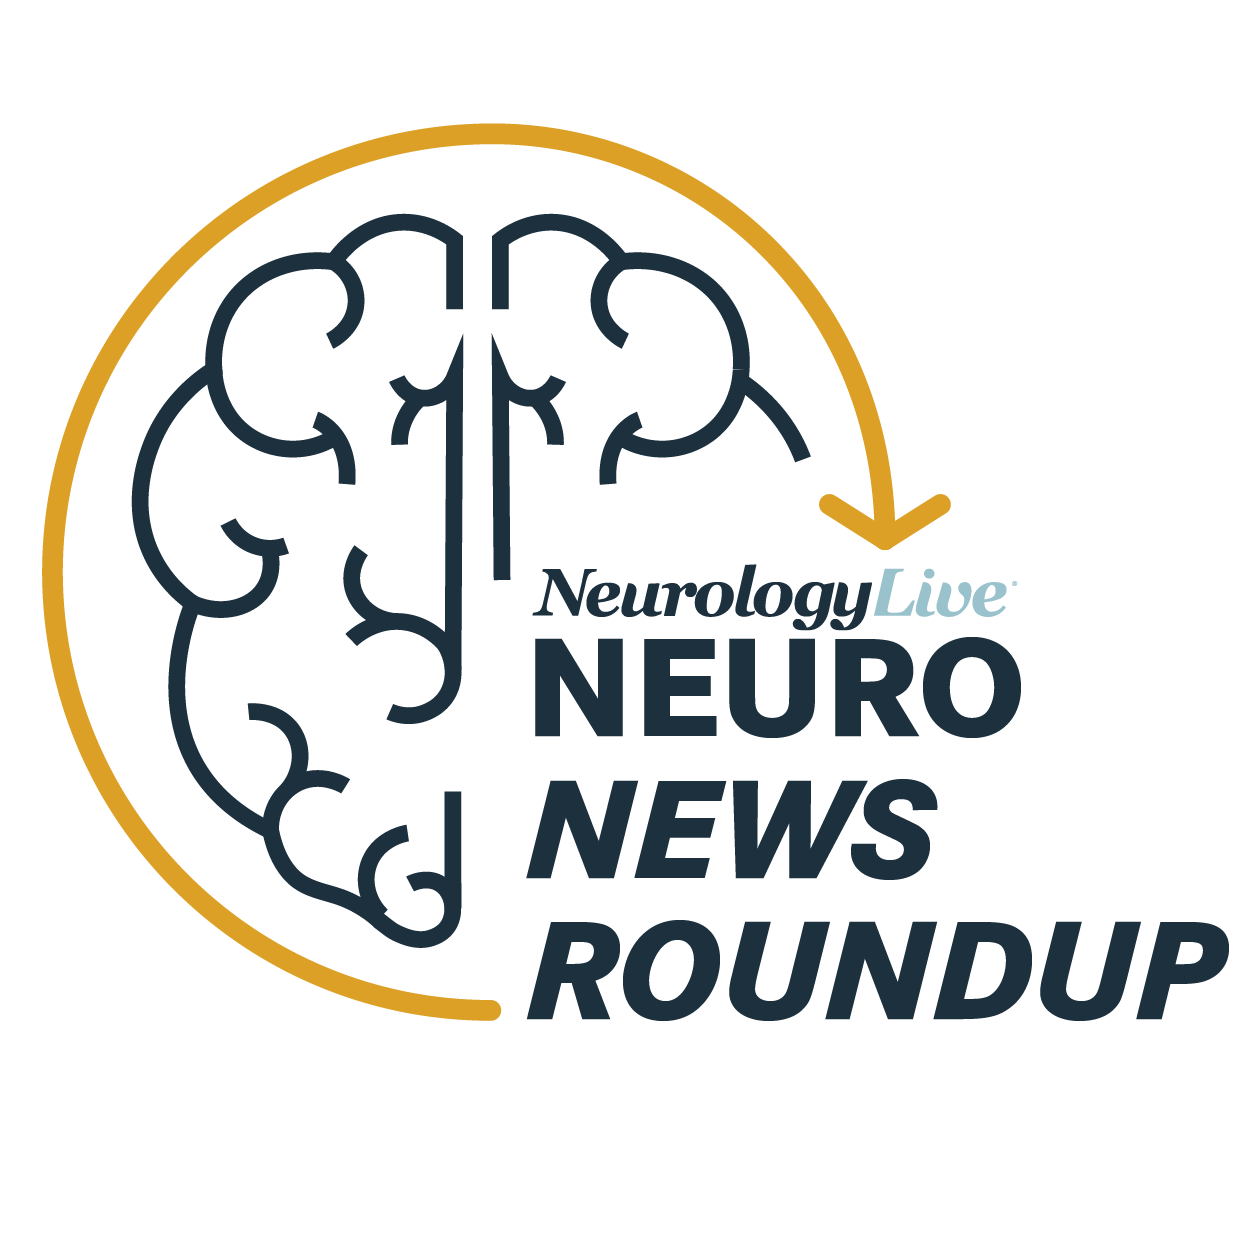 5 Clinical Trial Readouts in Neurology to Look for in 2023